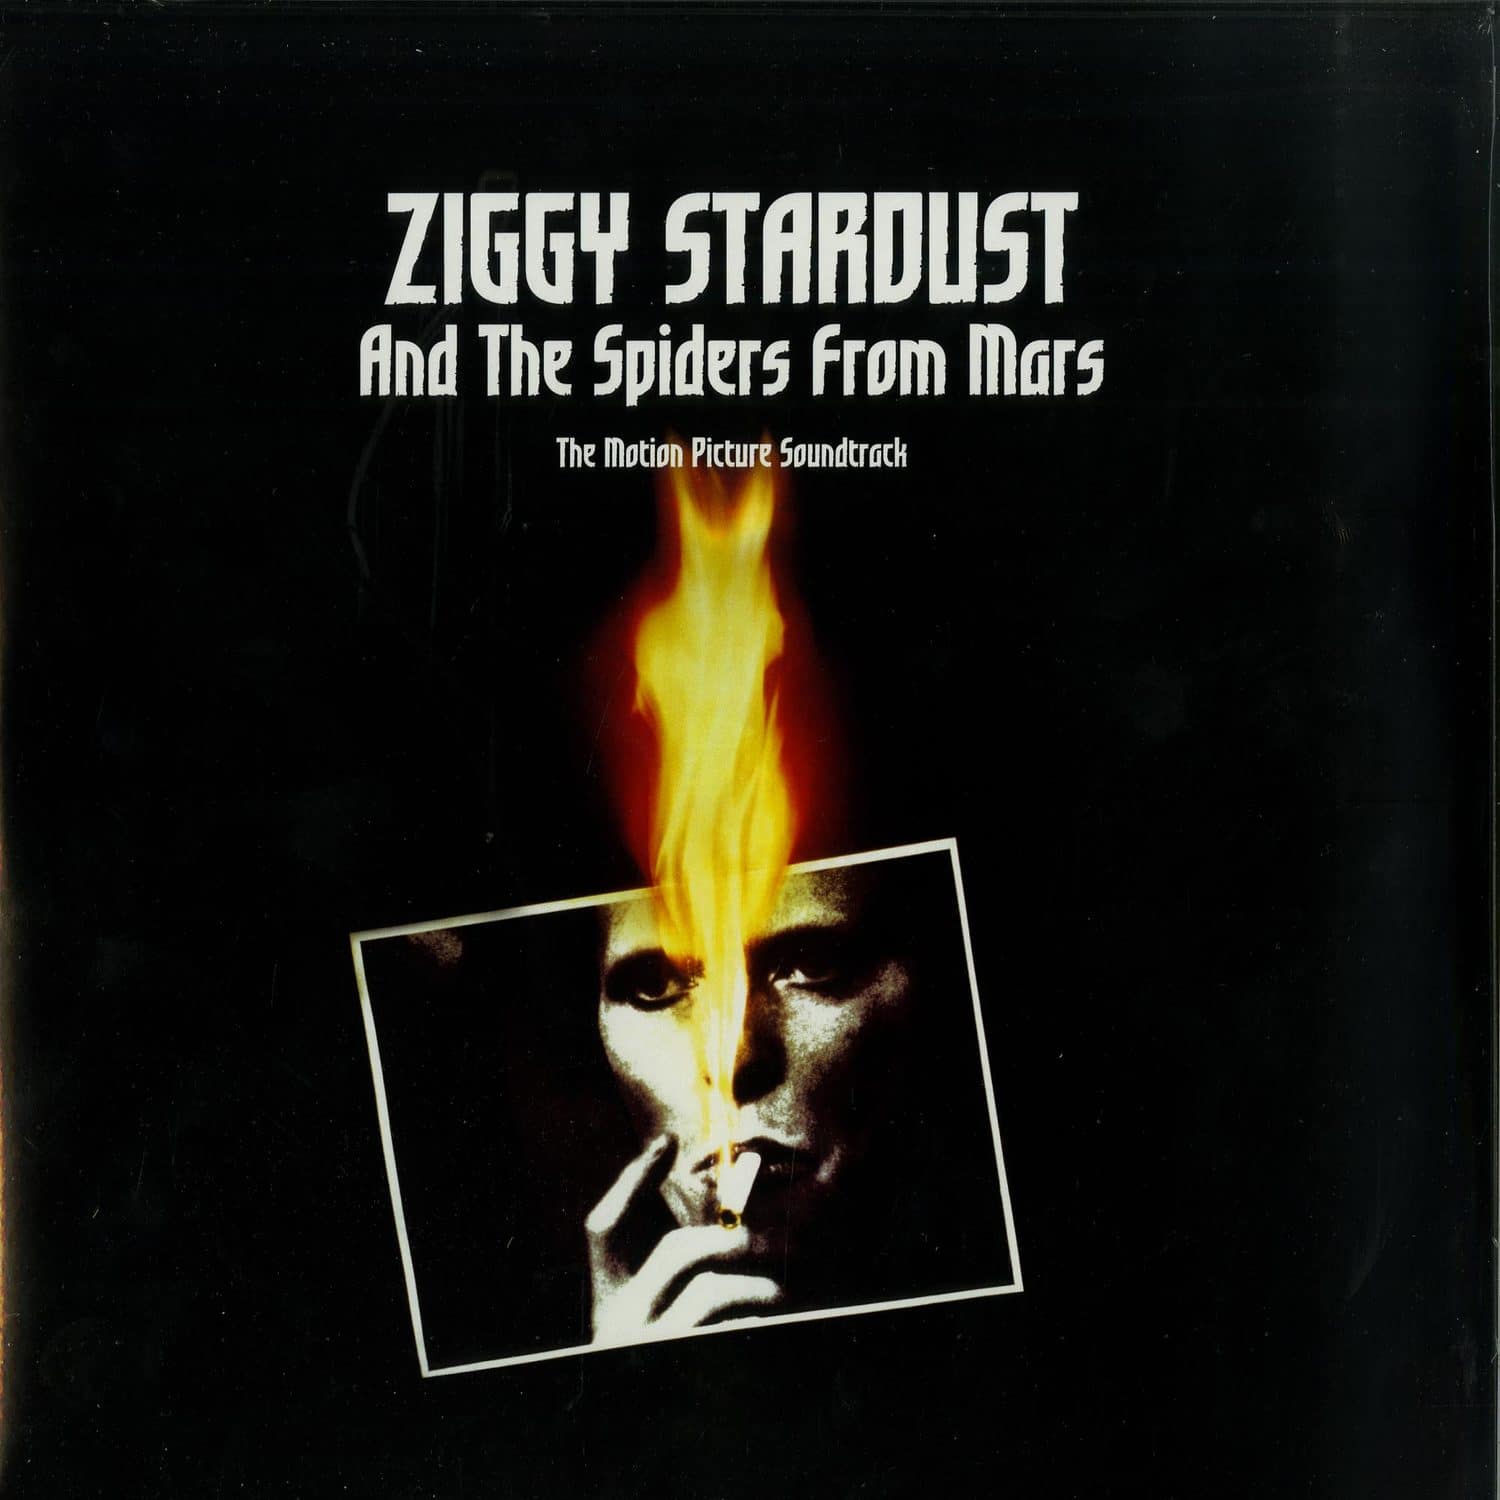 David Bowie - ZIGGY STARDUST AND THE SPIDERS FROM MARS - O.S.T. 